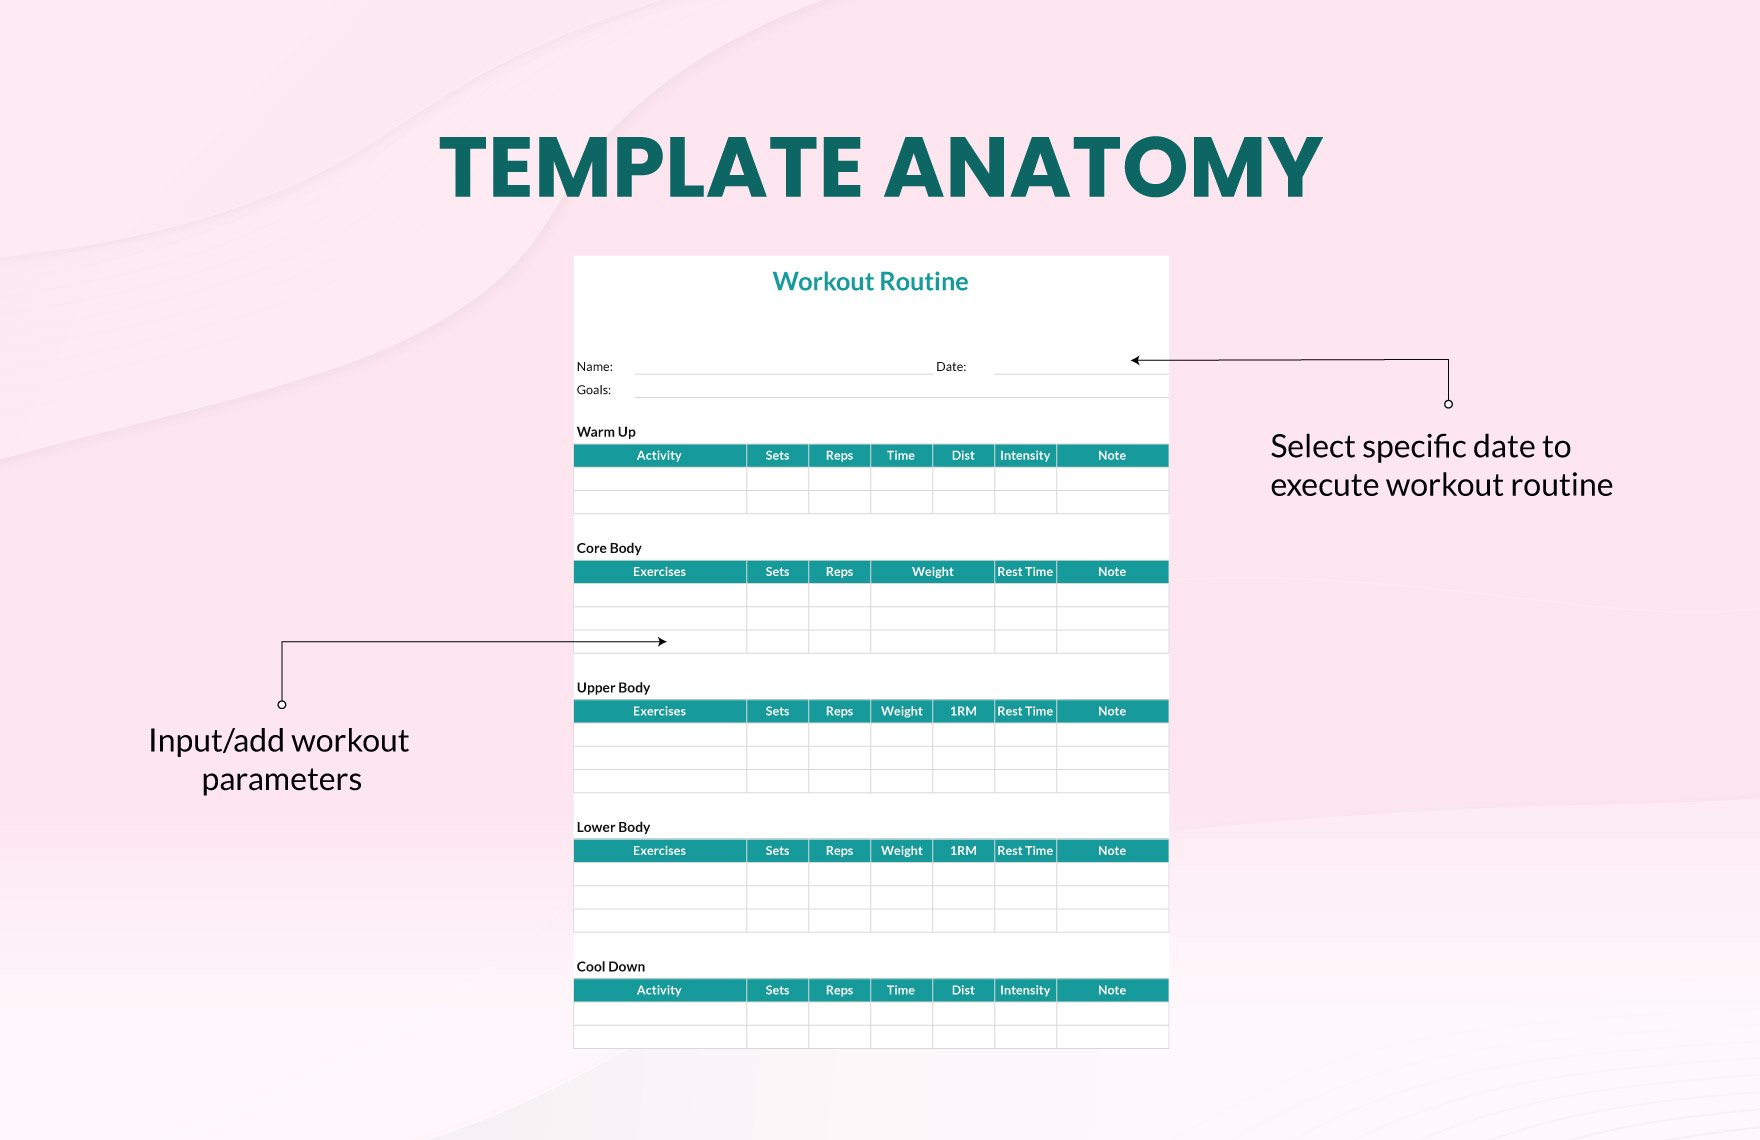 Workout Routine Template